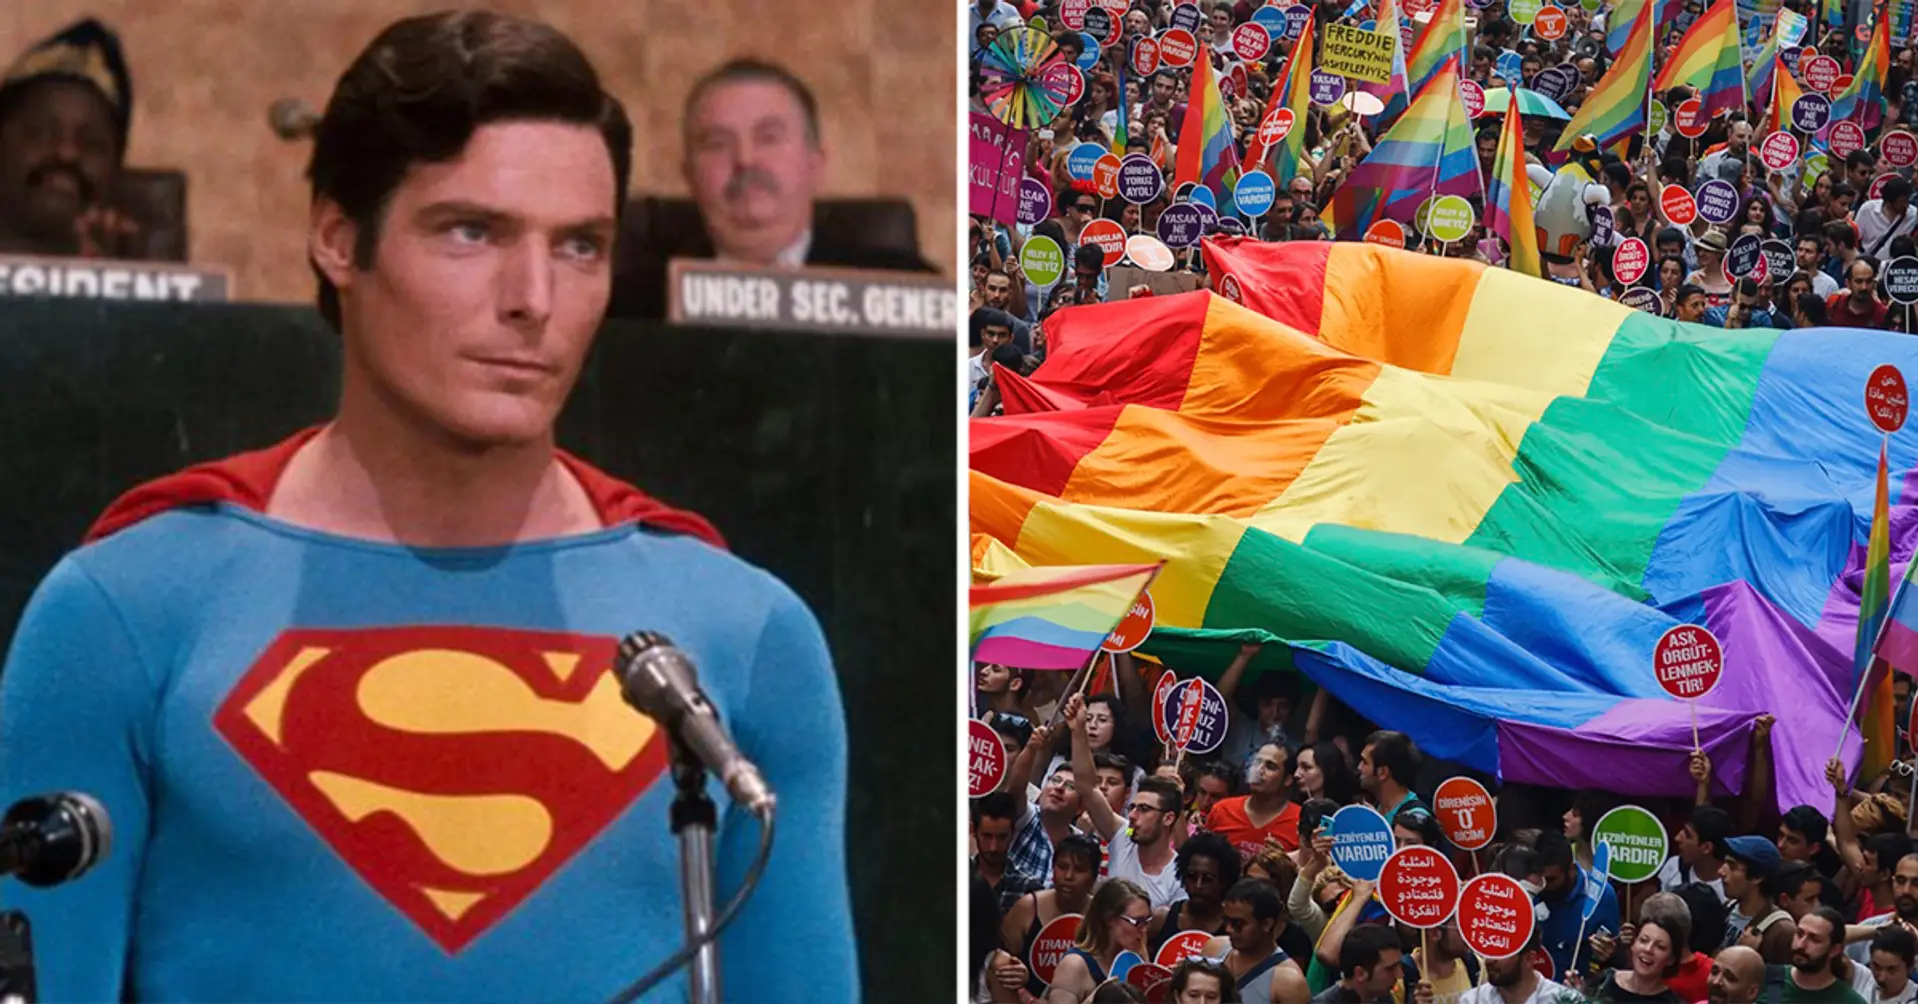 OFFICIAL: New superman is bisexual, falls in love with a male friend – statement from DC Comics